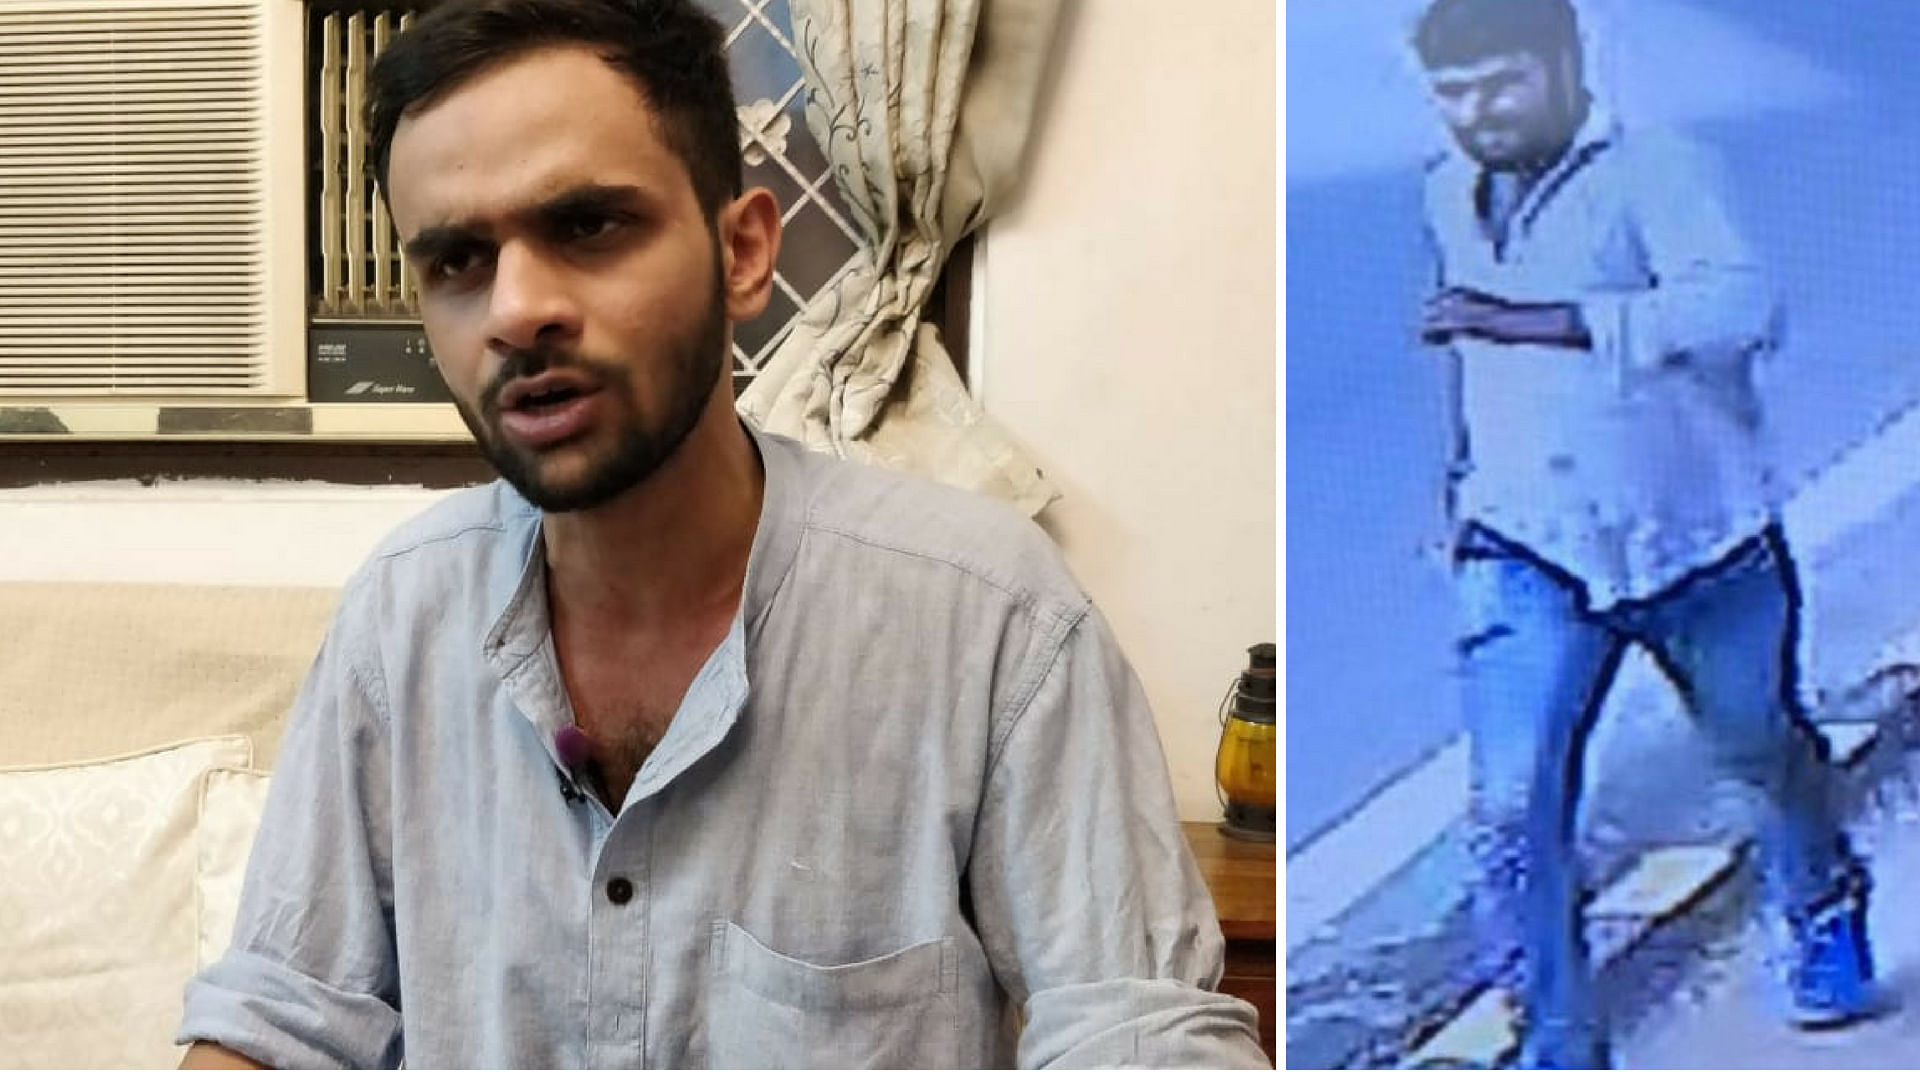 JNU student leader Umar Khalid escaped unharmed after an unknown assailant opened fire outside New Delhi’s Constitution Club.